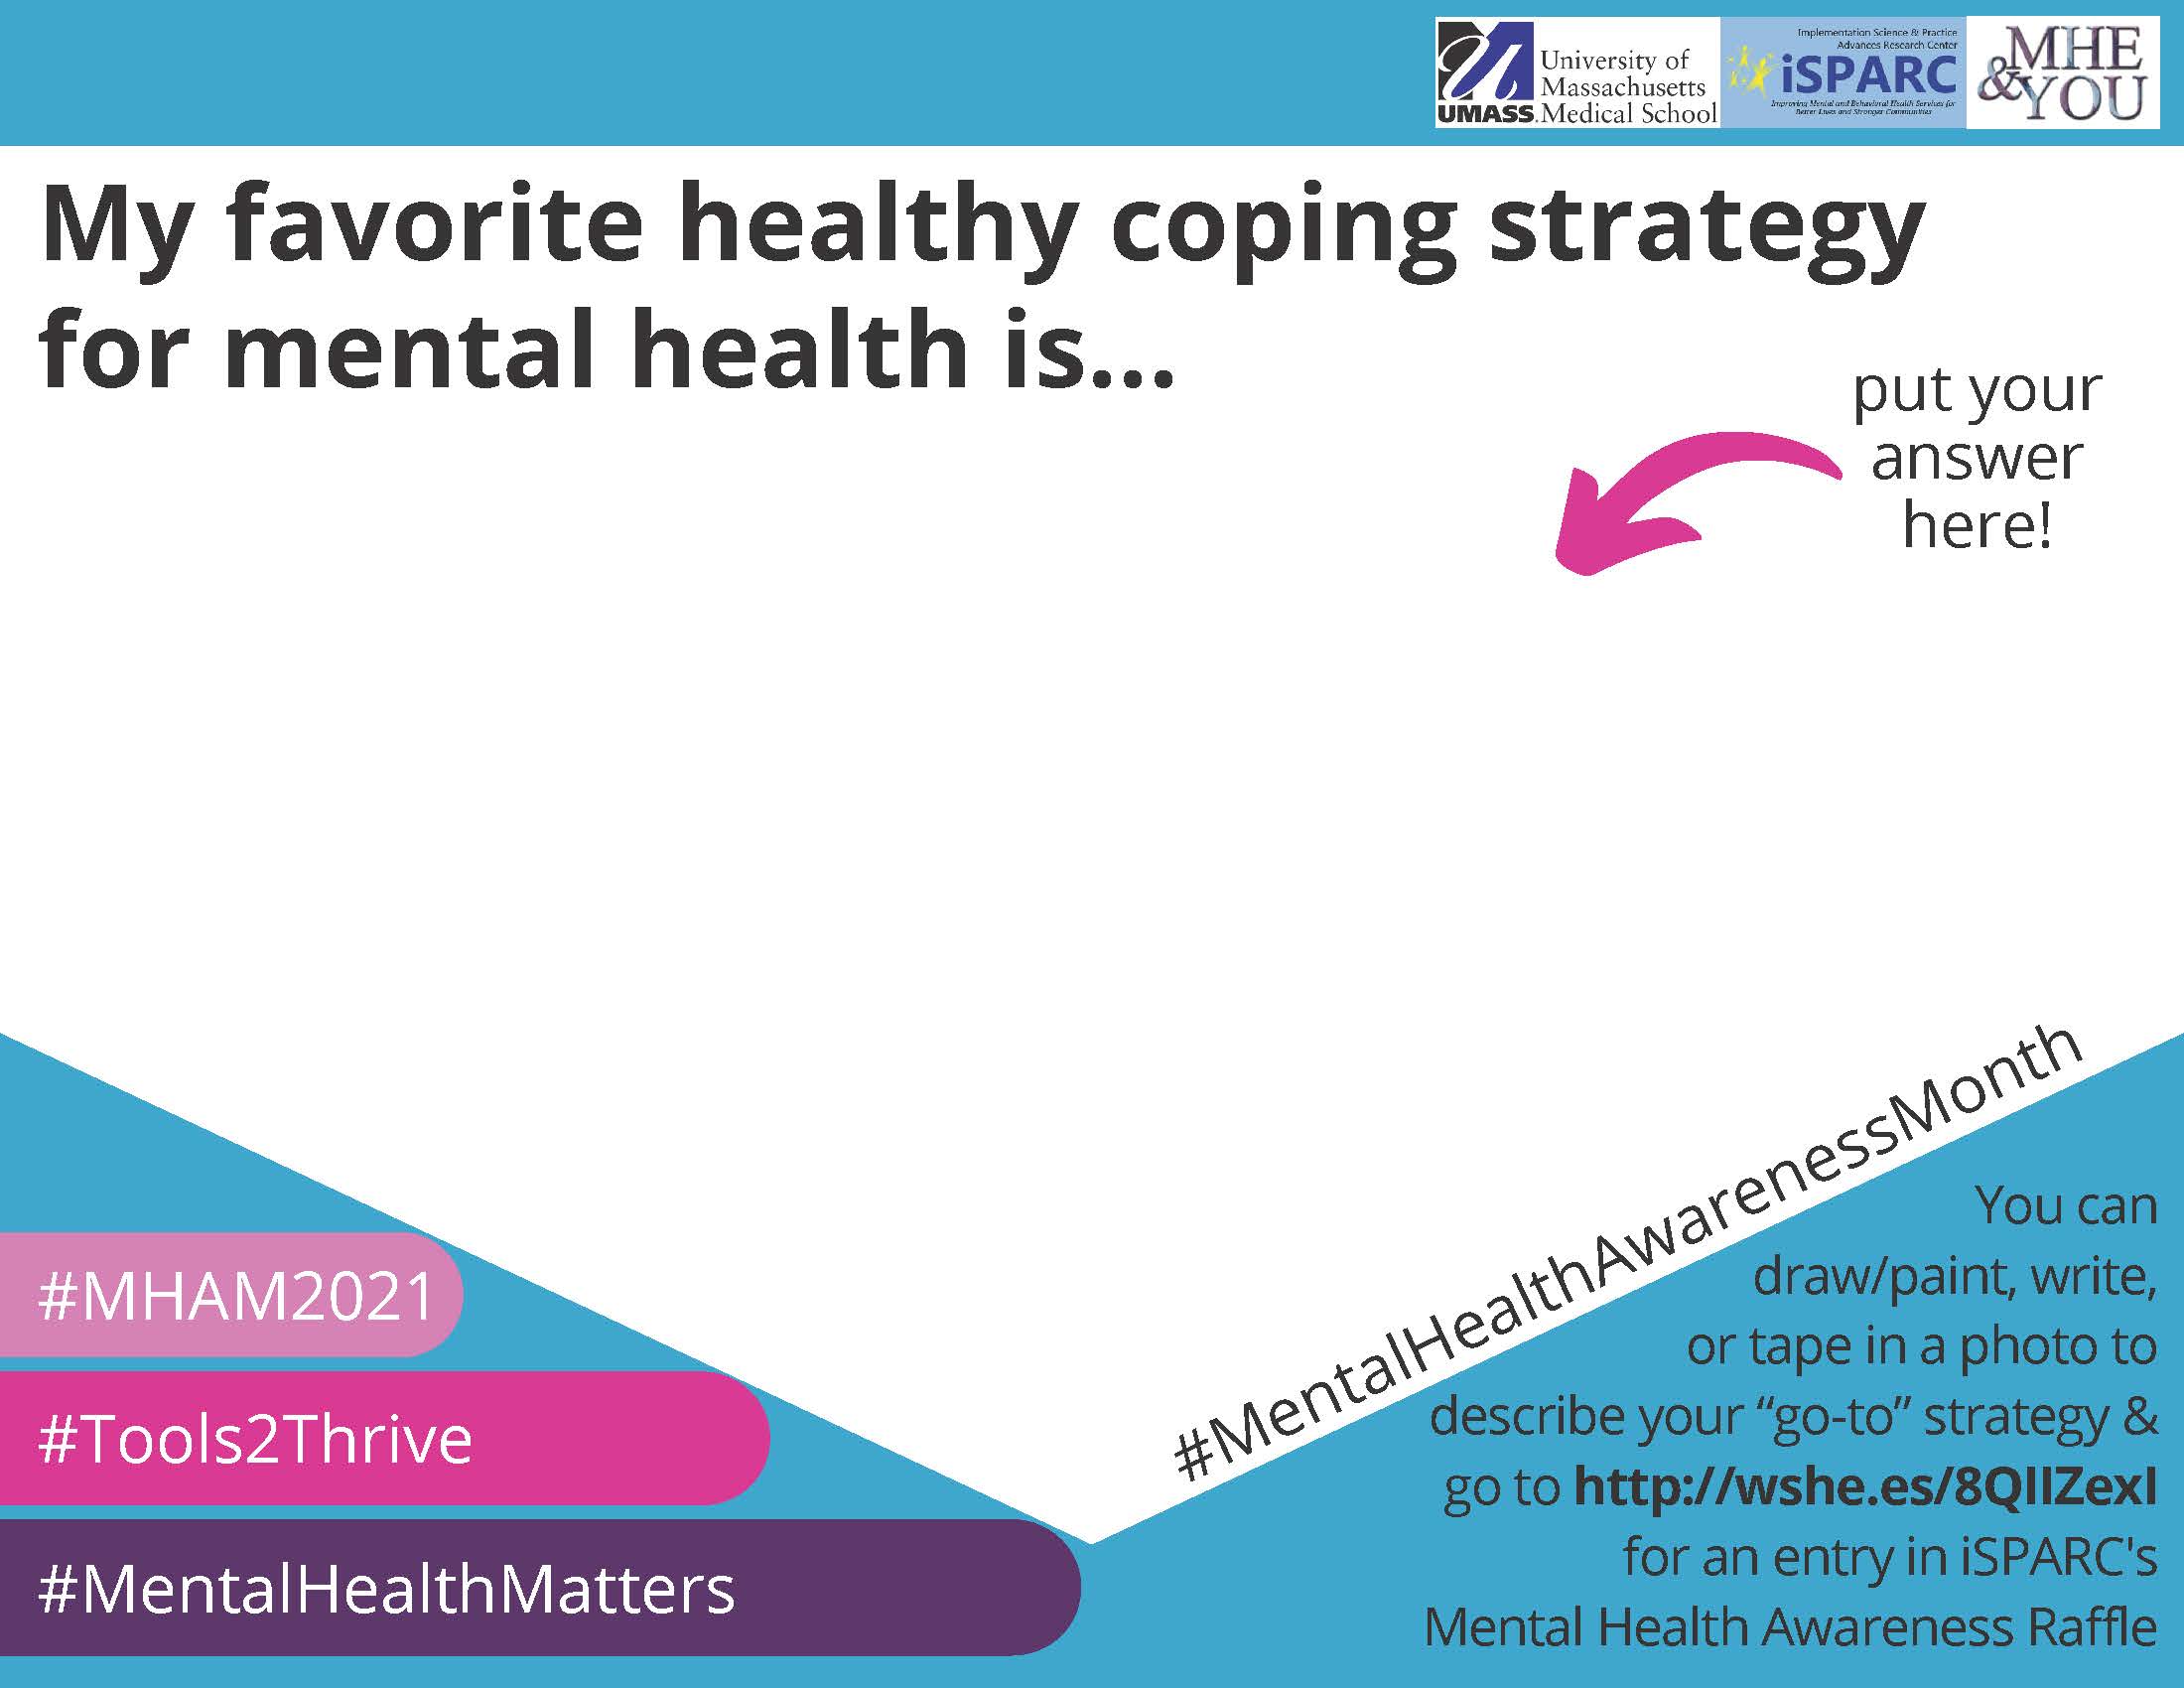 Prompt: My favorite healthy coping strategy for mental health is... put your answer here!